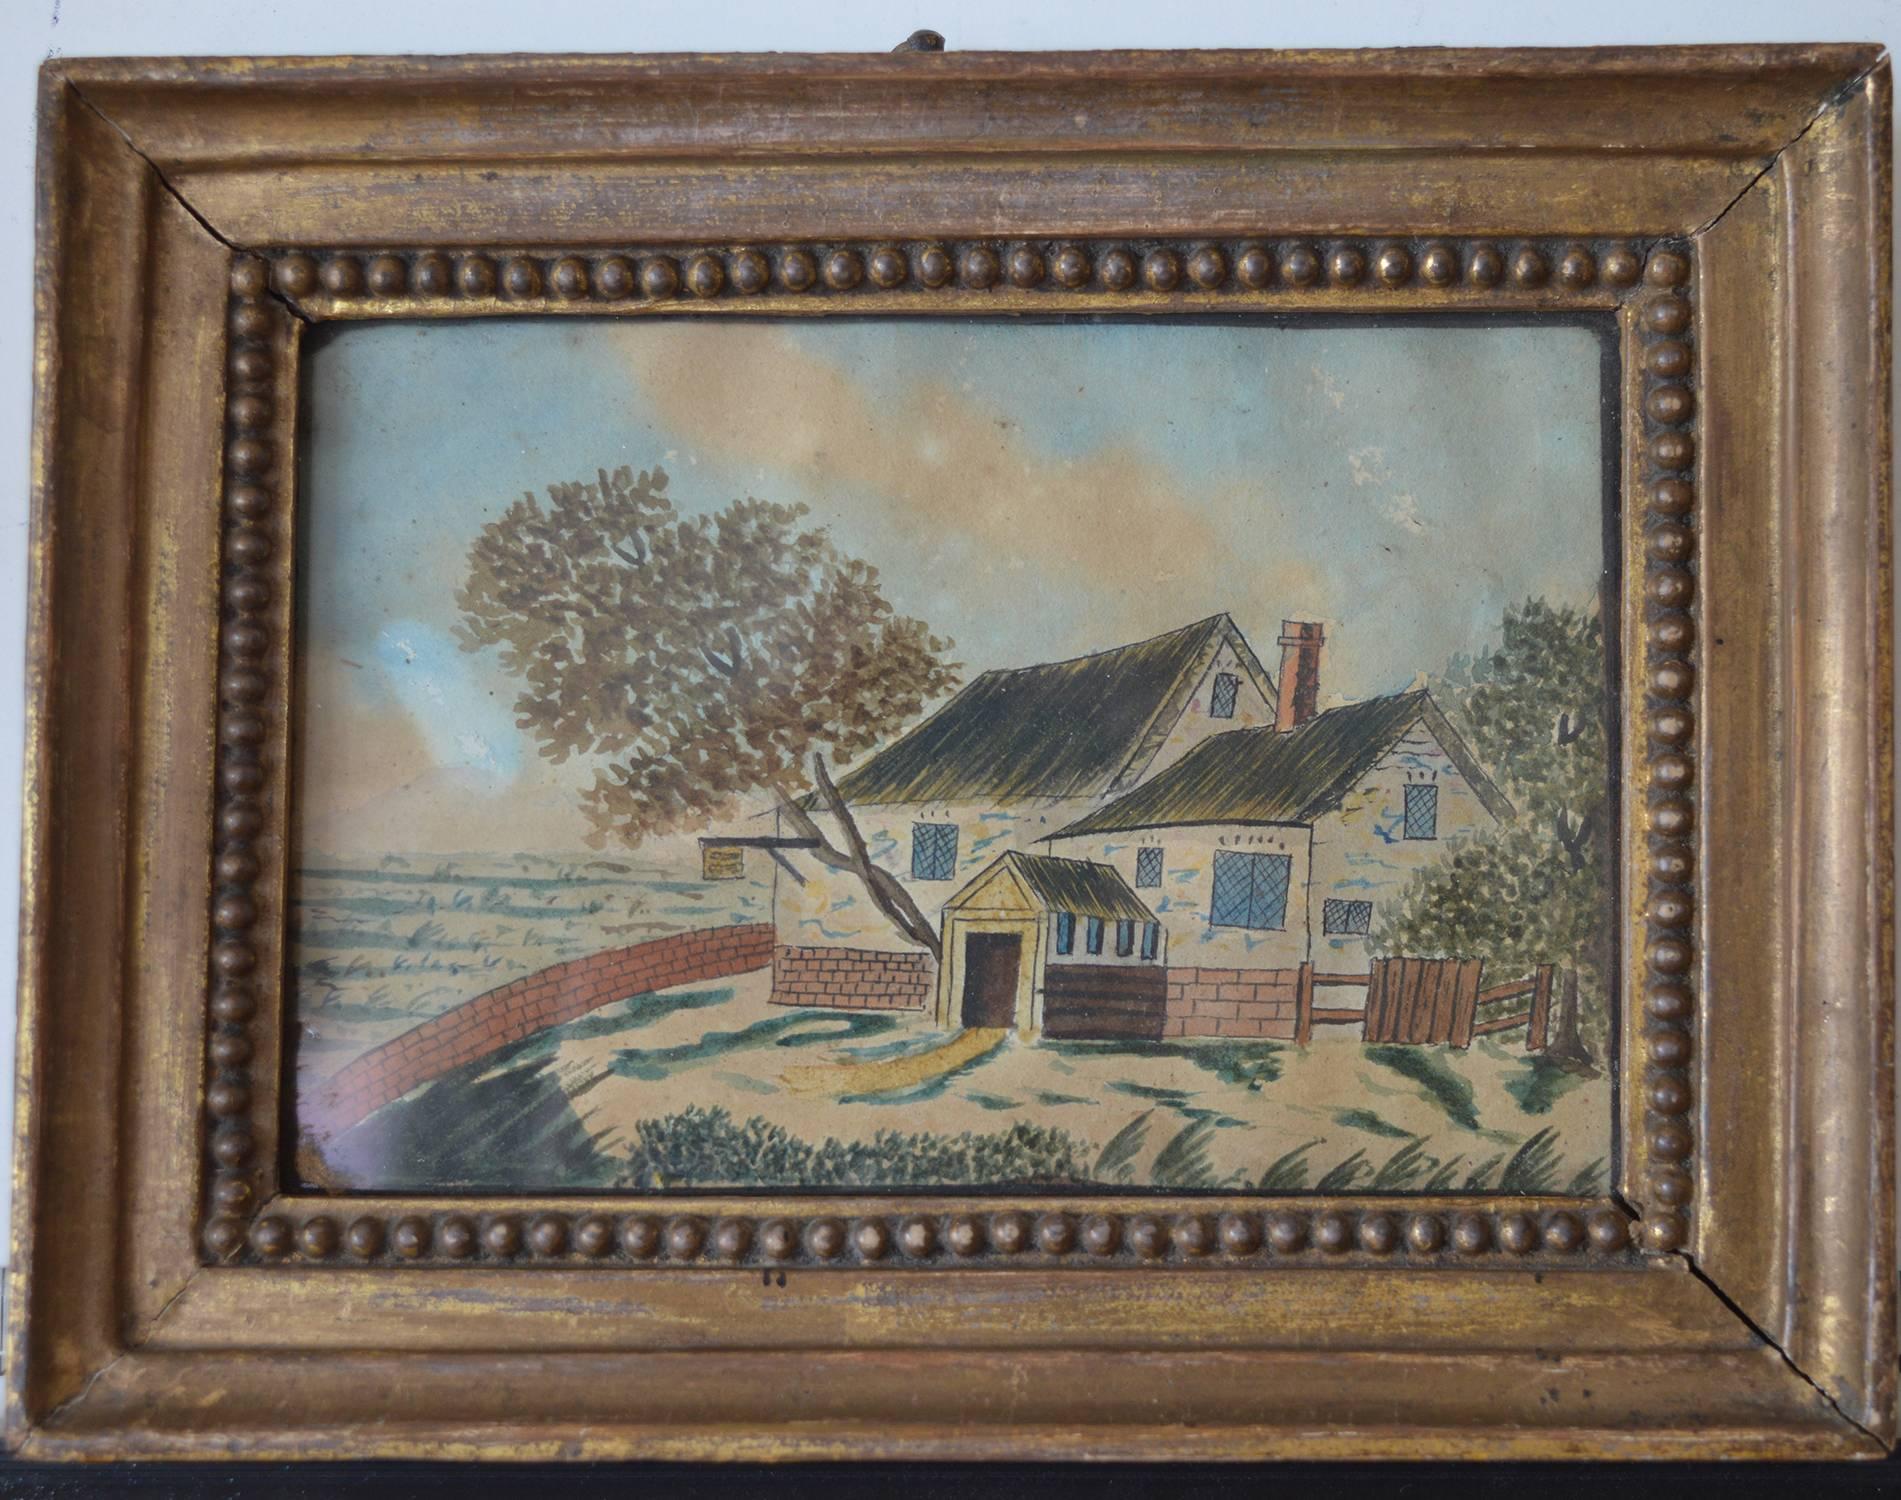 
Wonderful primitive or naive image in muted colors.

One of a Set of three.

Gouache on paper. Artist unknown.

Original distressed gilt frame.

Untouched at the back.